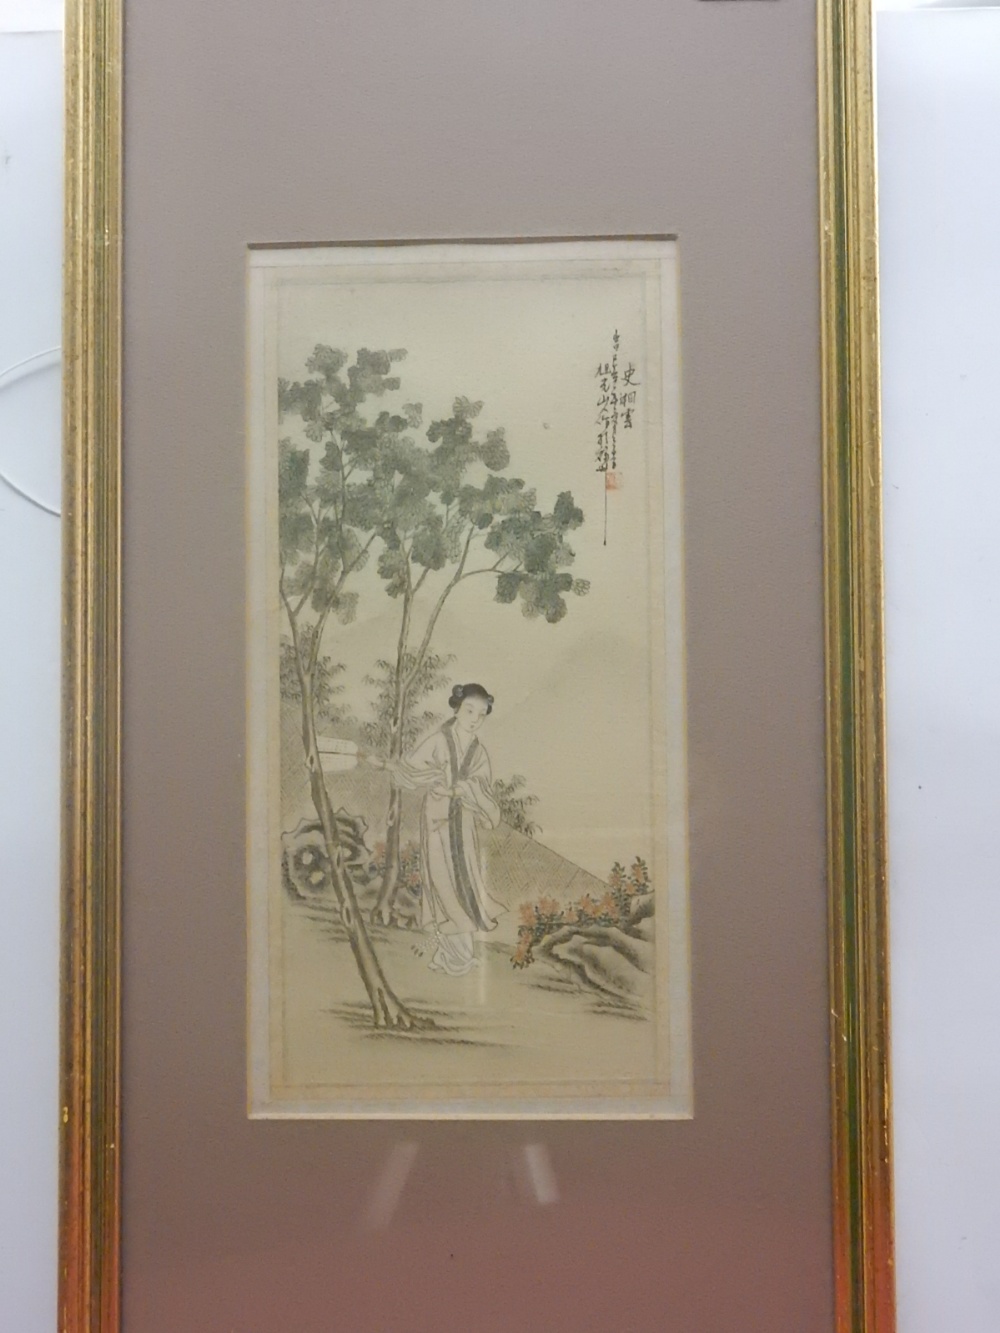 Two Chinese paintings on rice paper depicting Geisha girls, framed and glazed - 11 1/2in. x 5 1/